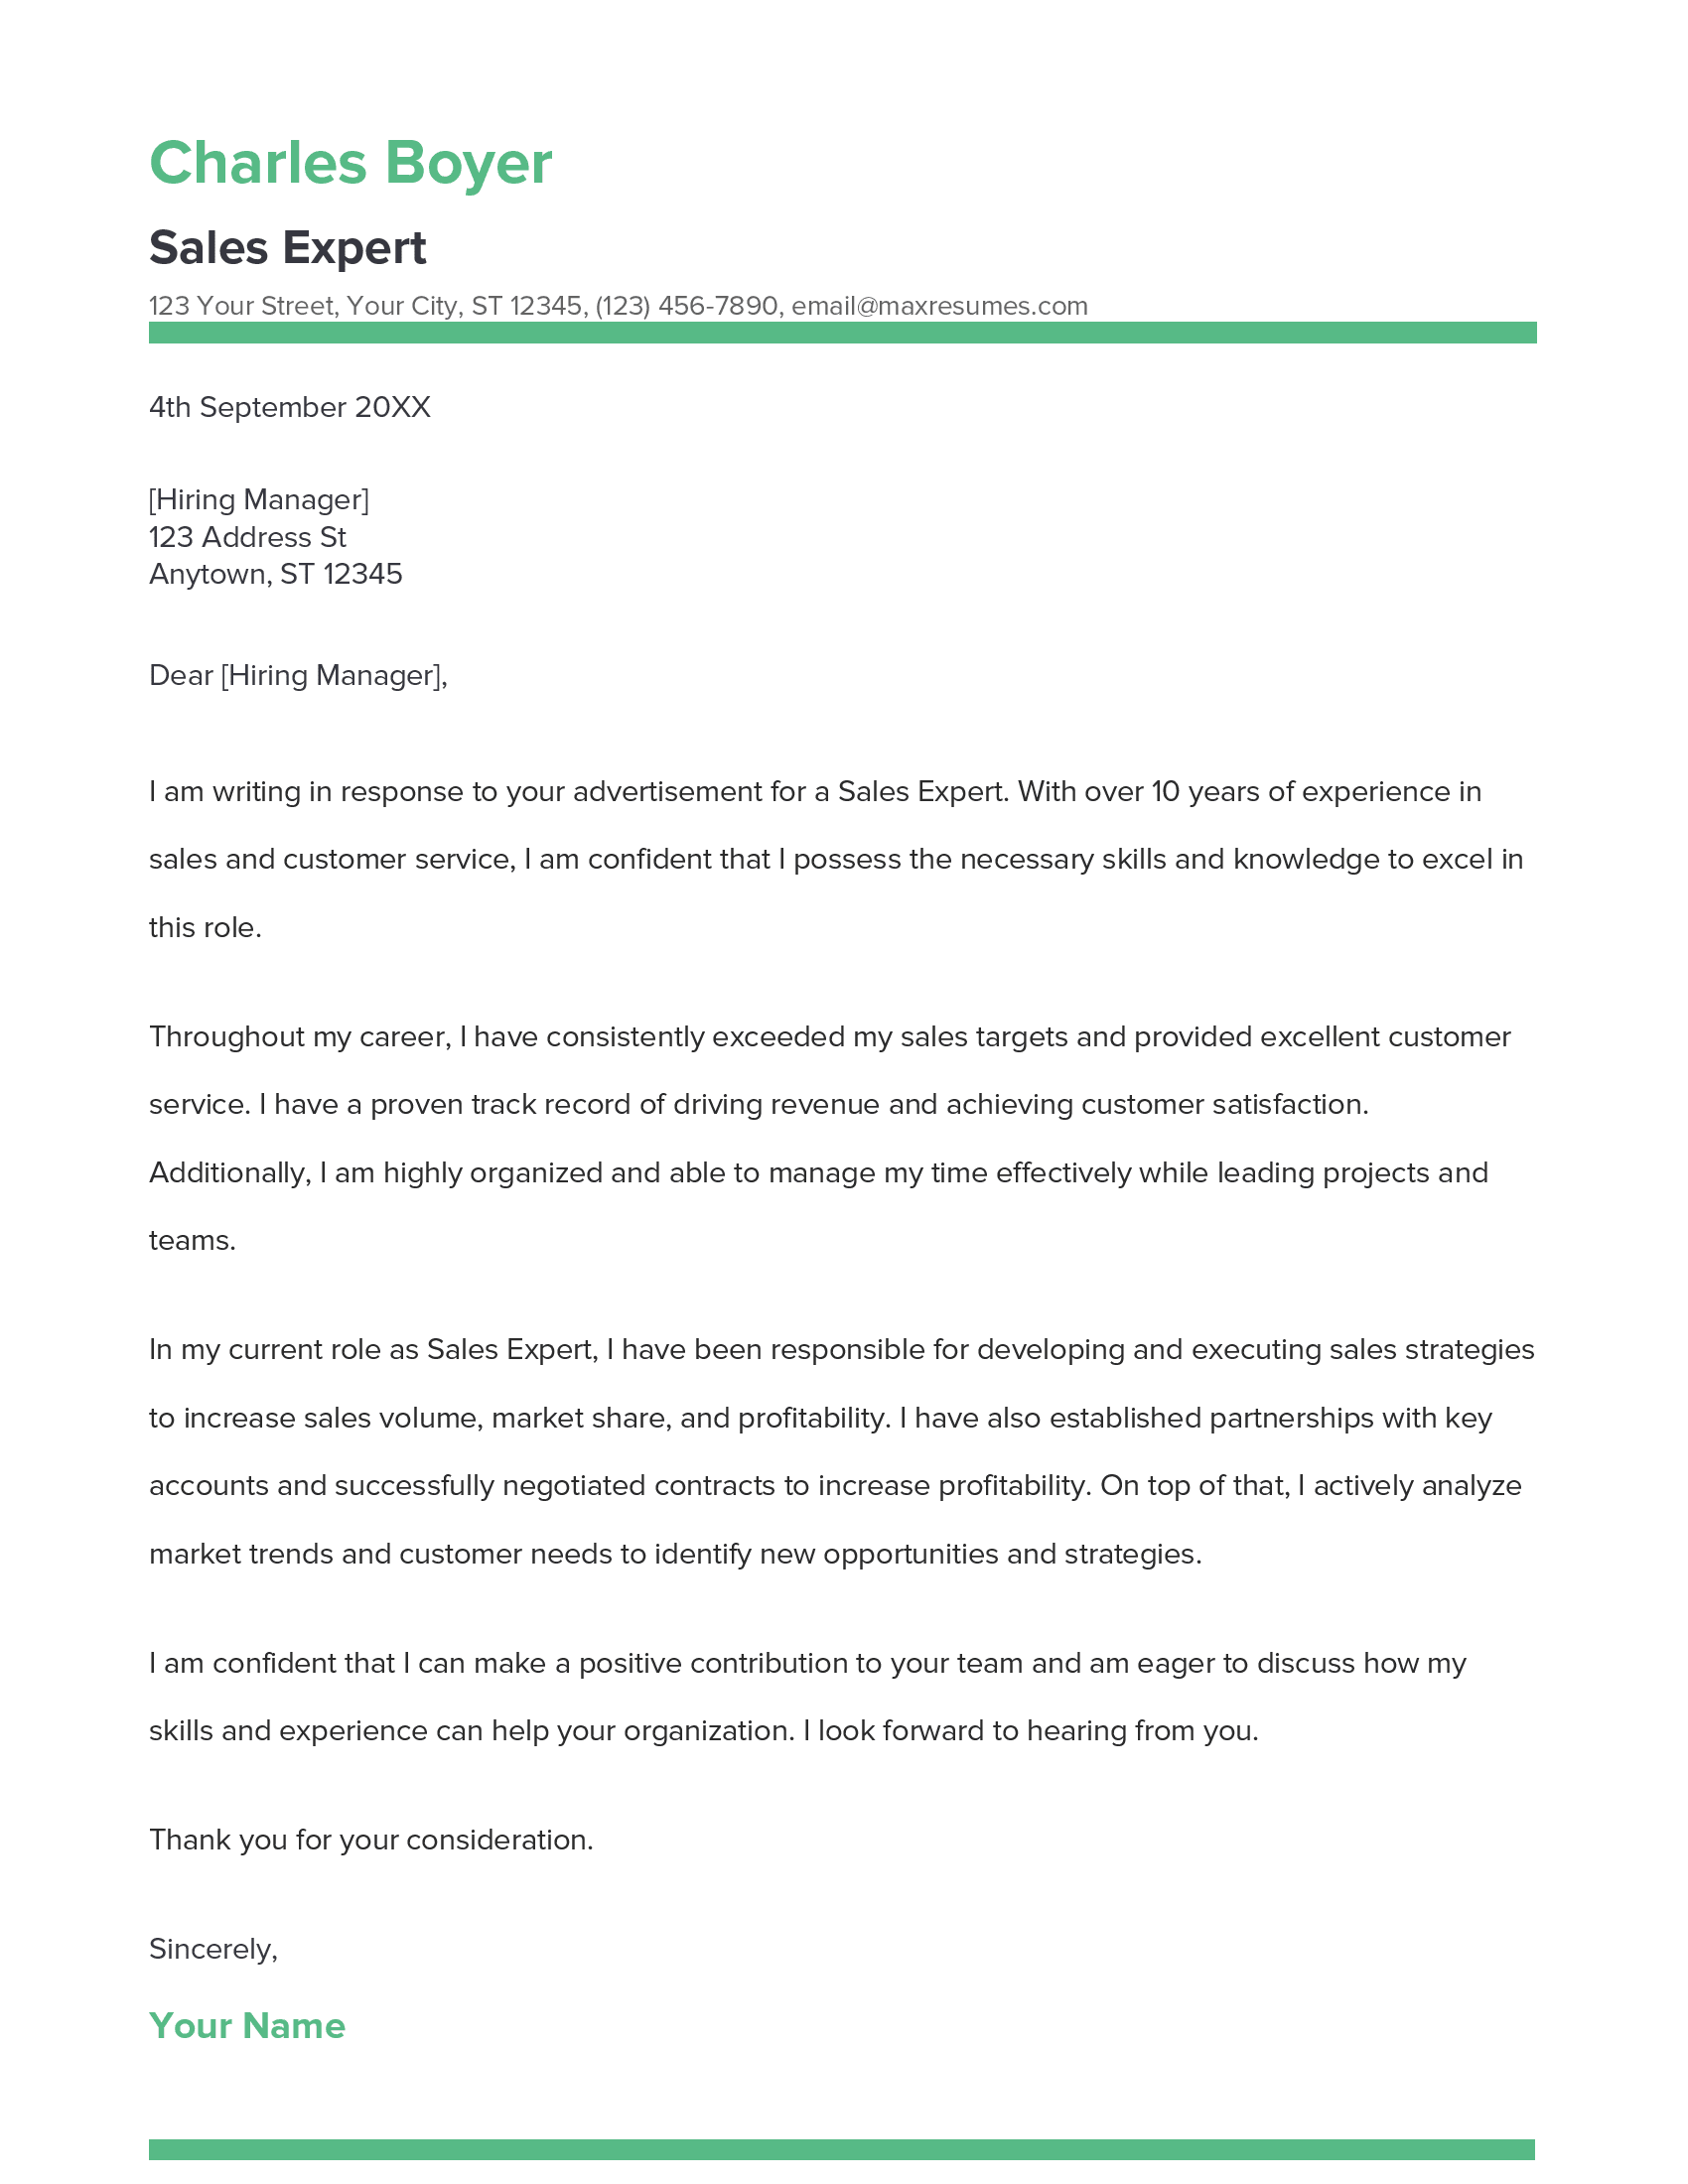 Sales Expert Cover Letter Example